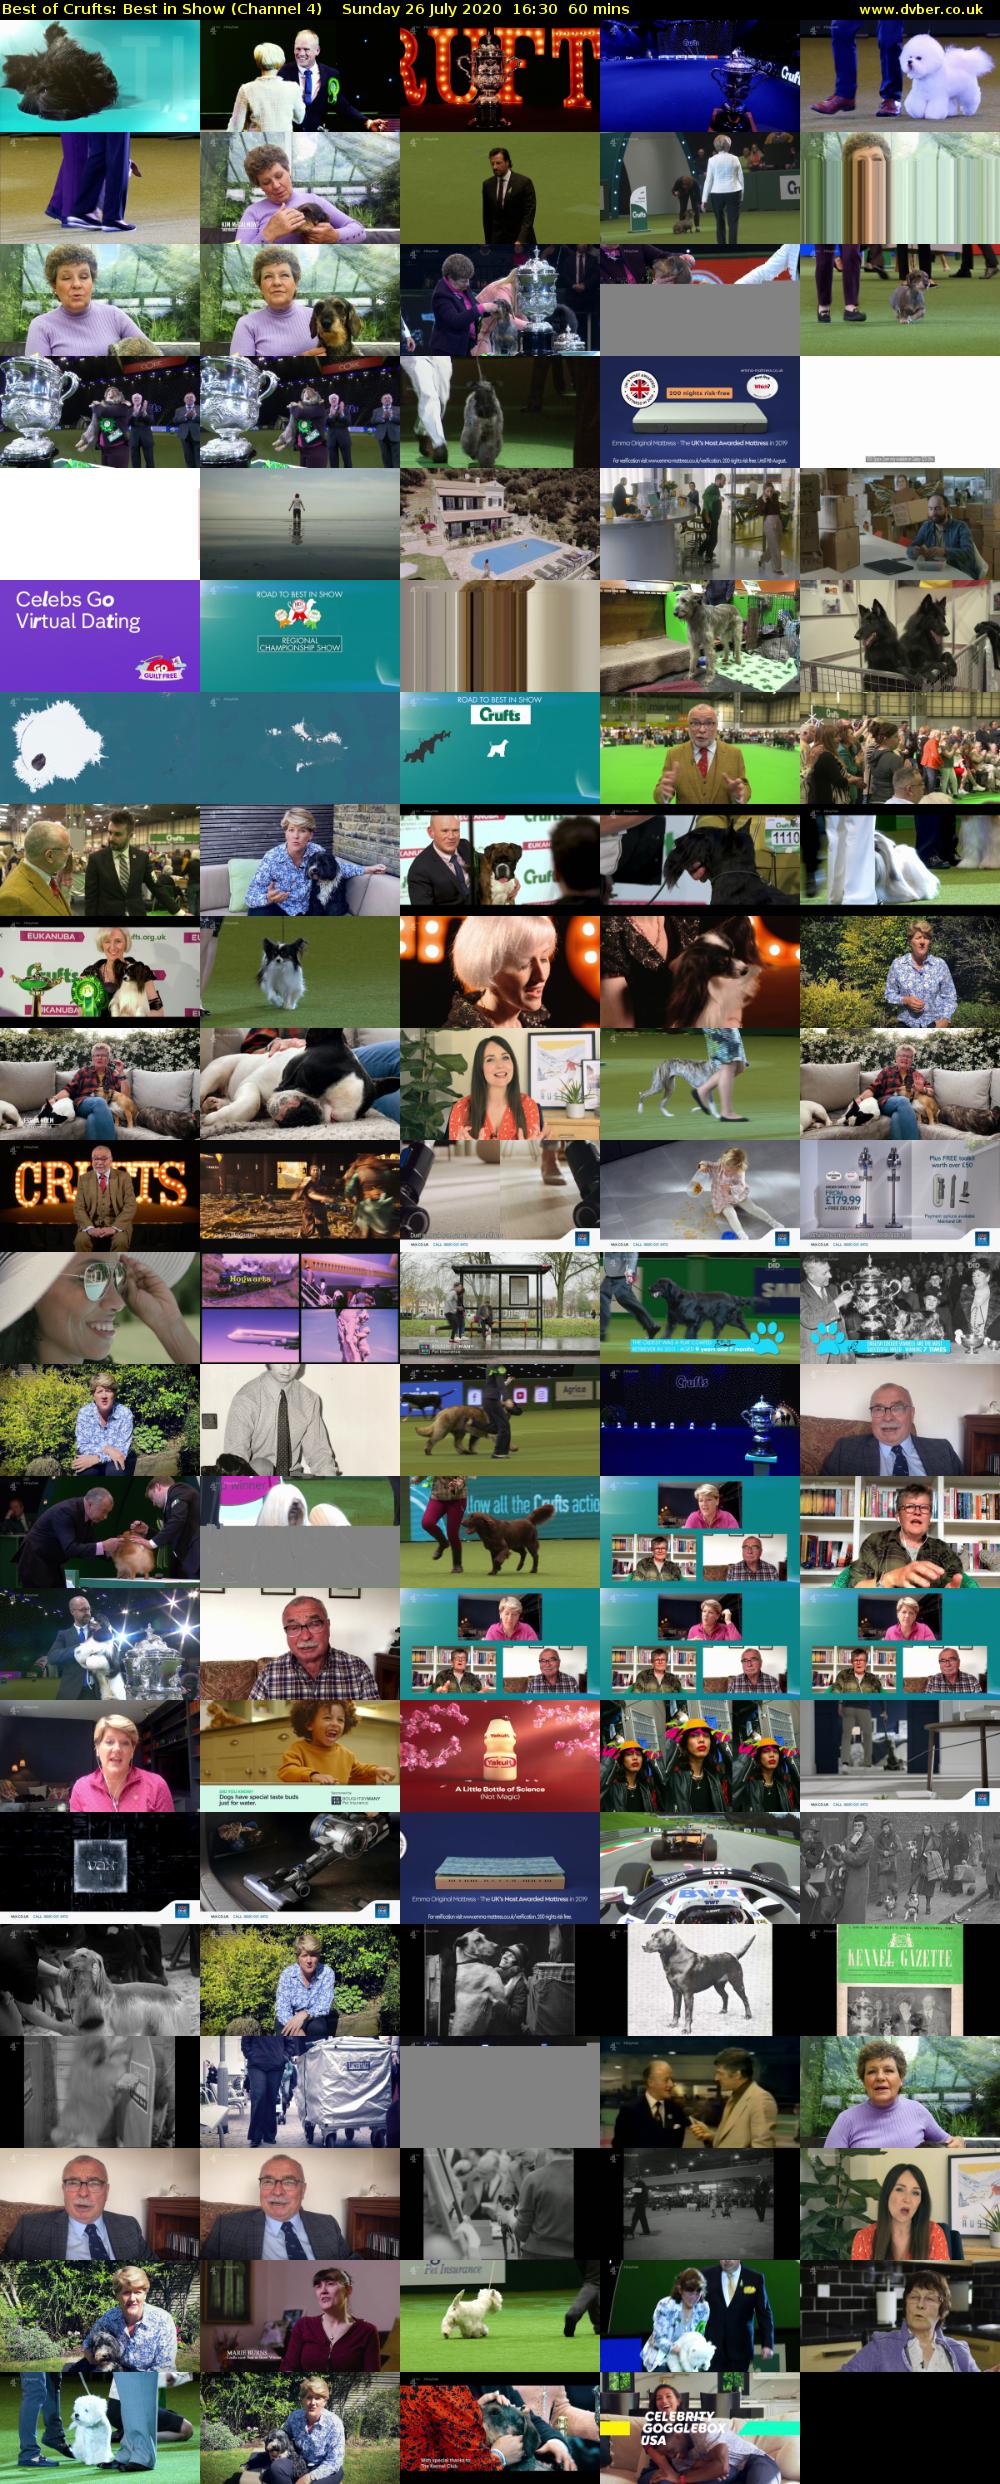 Best of Crufts: Best in Show (Channel 4) Sunday 26 July 2020 16:30 - 17:30